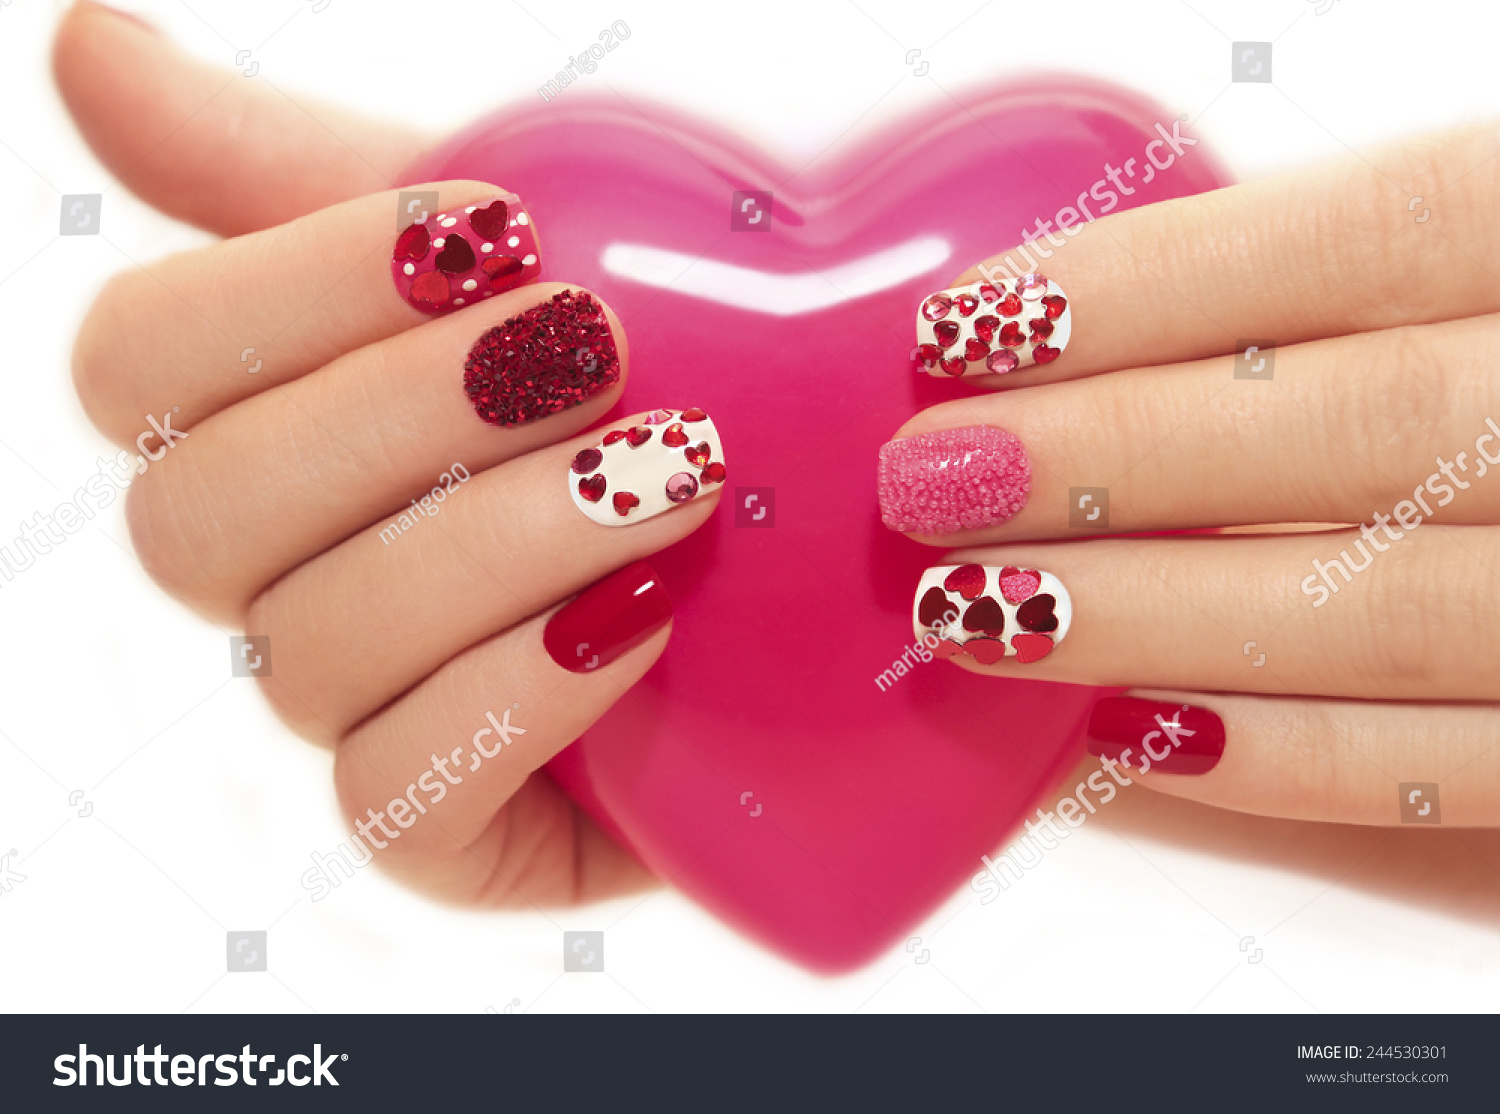 Manicure with rhinestones in the shape of hearts and pink balls on white and red nail Polish on a white background. #244530301